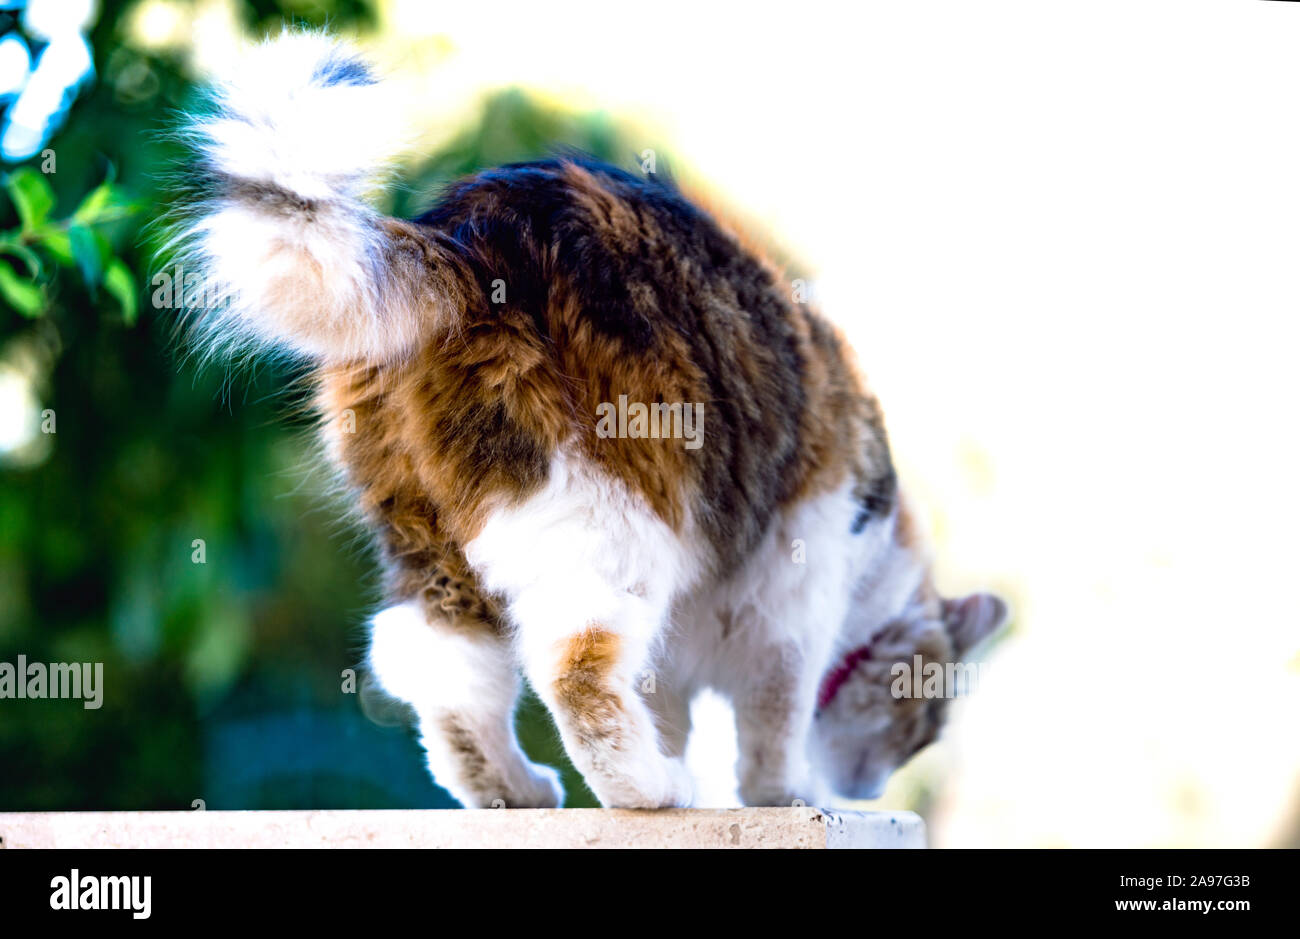 Back shot of a calico cat getting ready to jump down a wall into unknown outdoor territory. Missing pets concept. Stock Photo